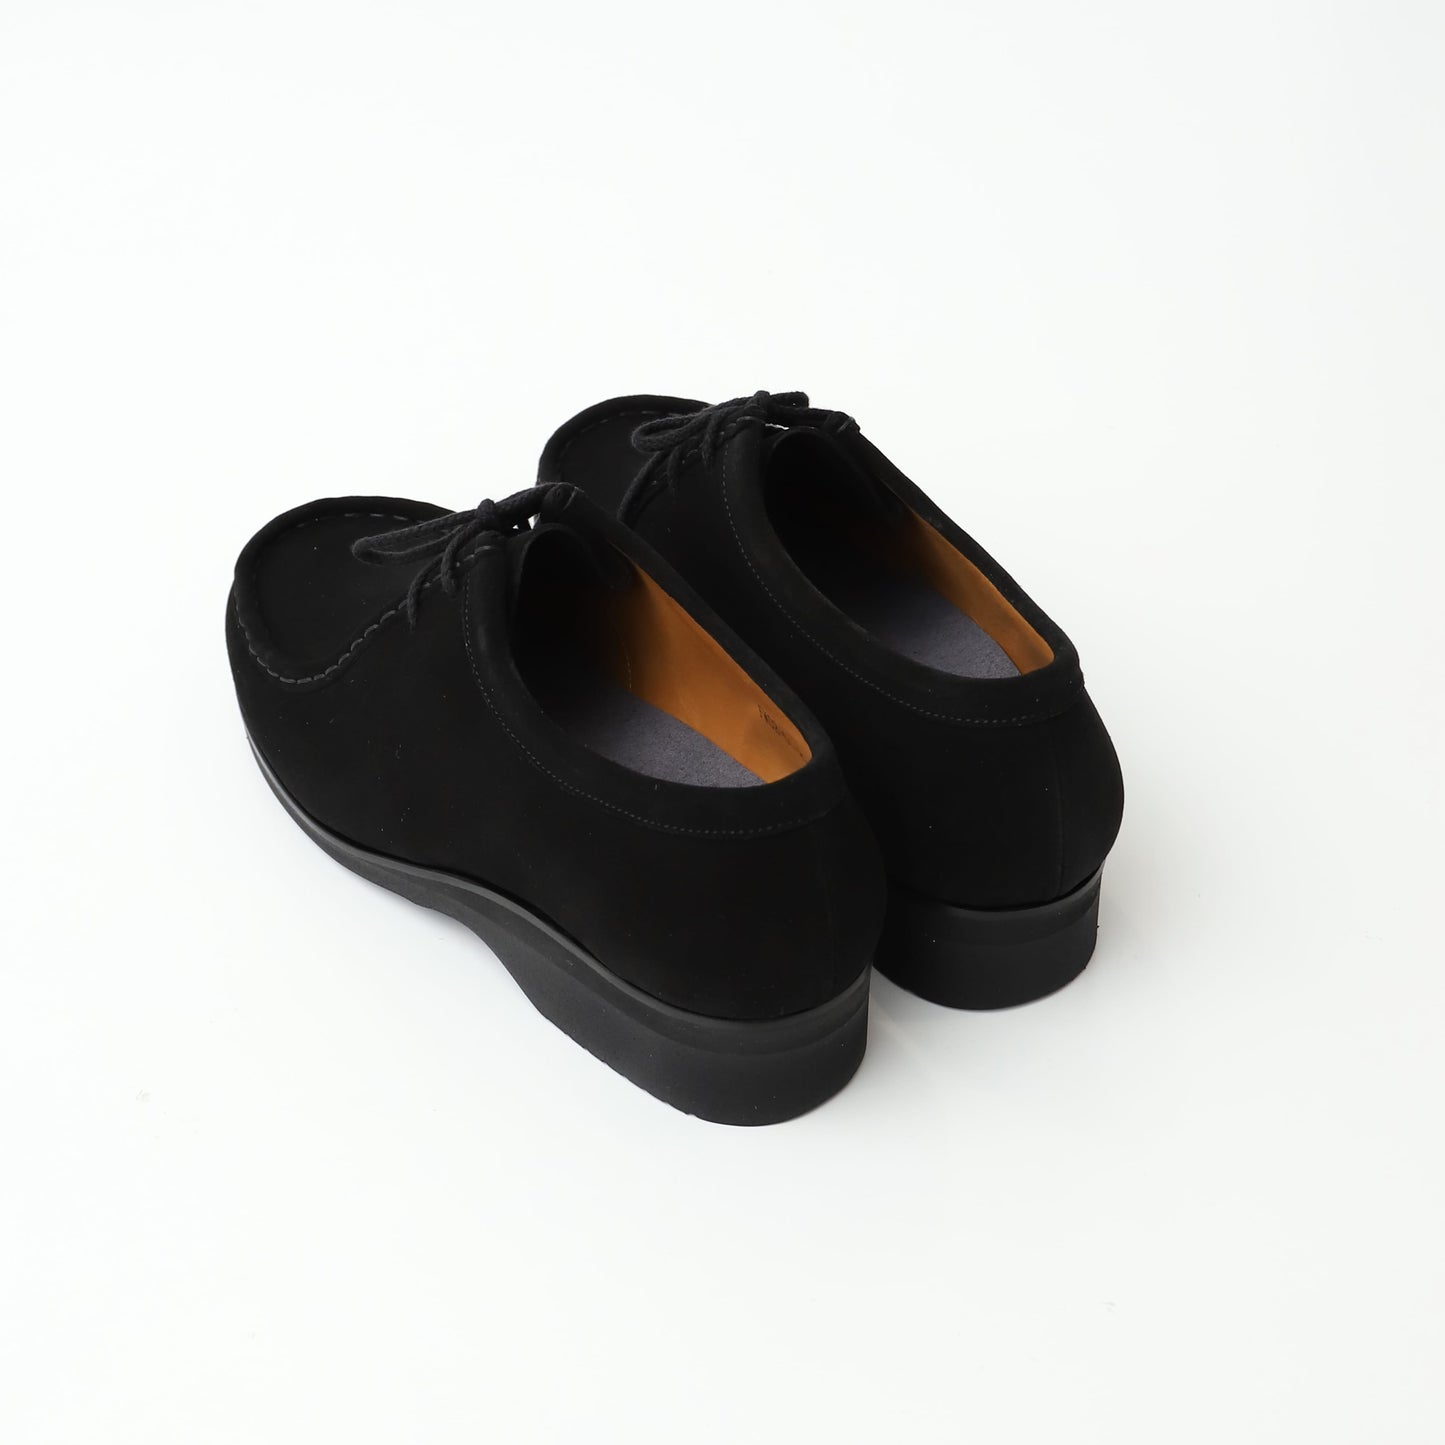 Tirolean shoes_Suede leather BLACK